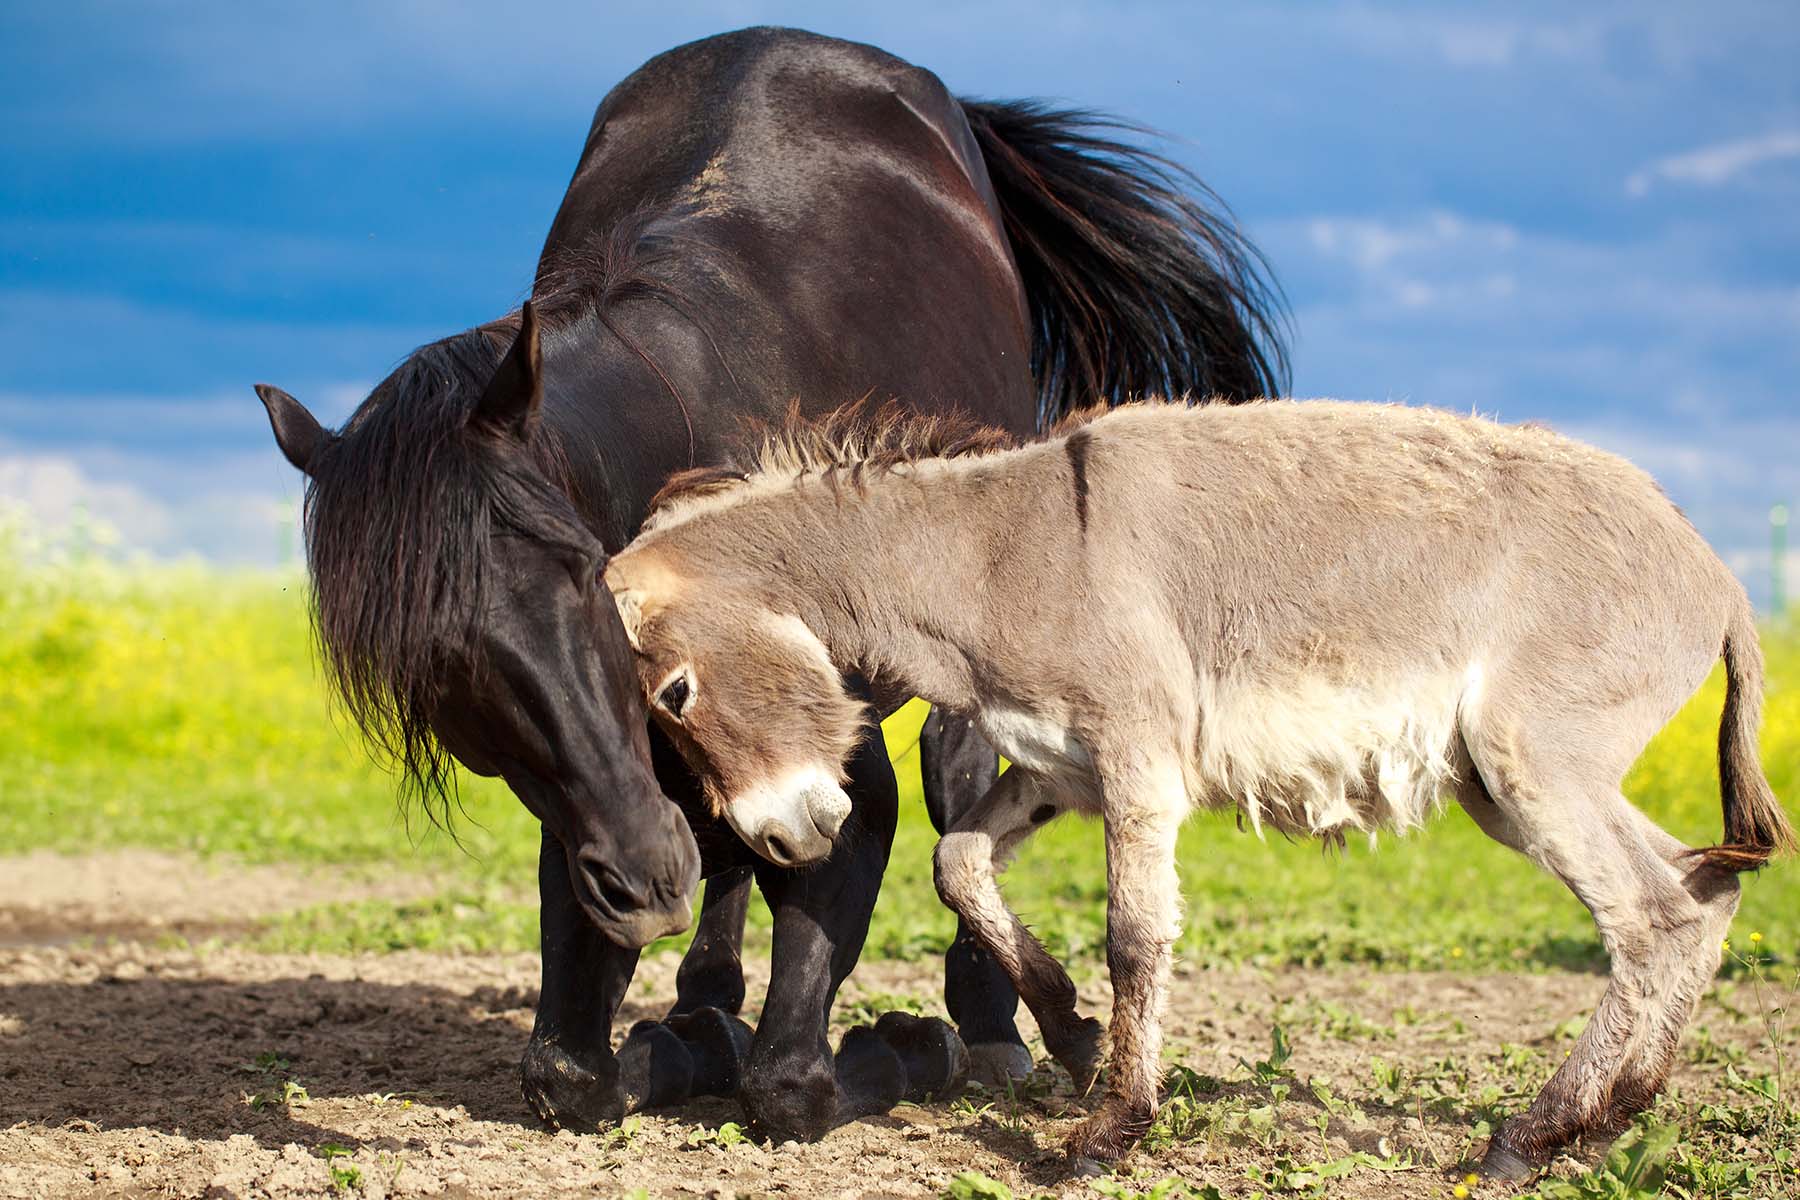 A black horse and gray donkey playing outdoors.